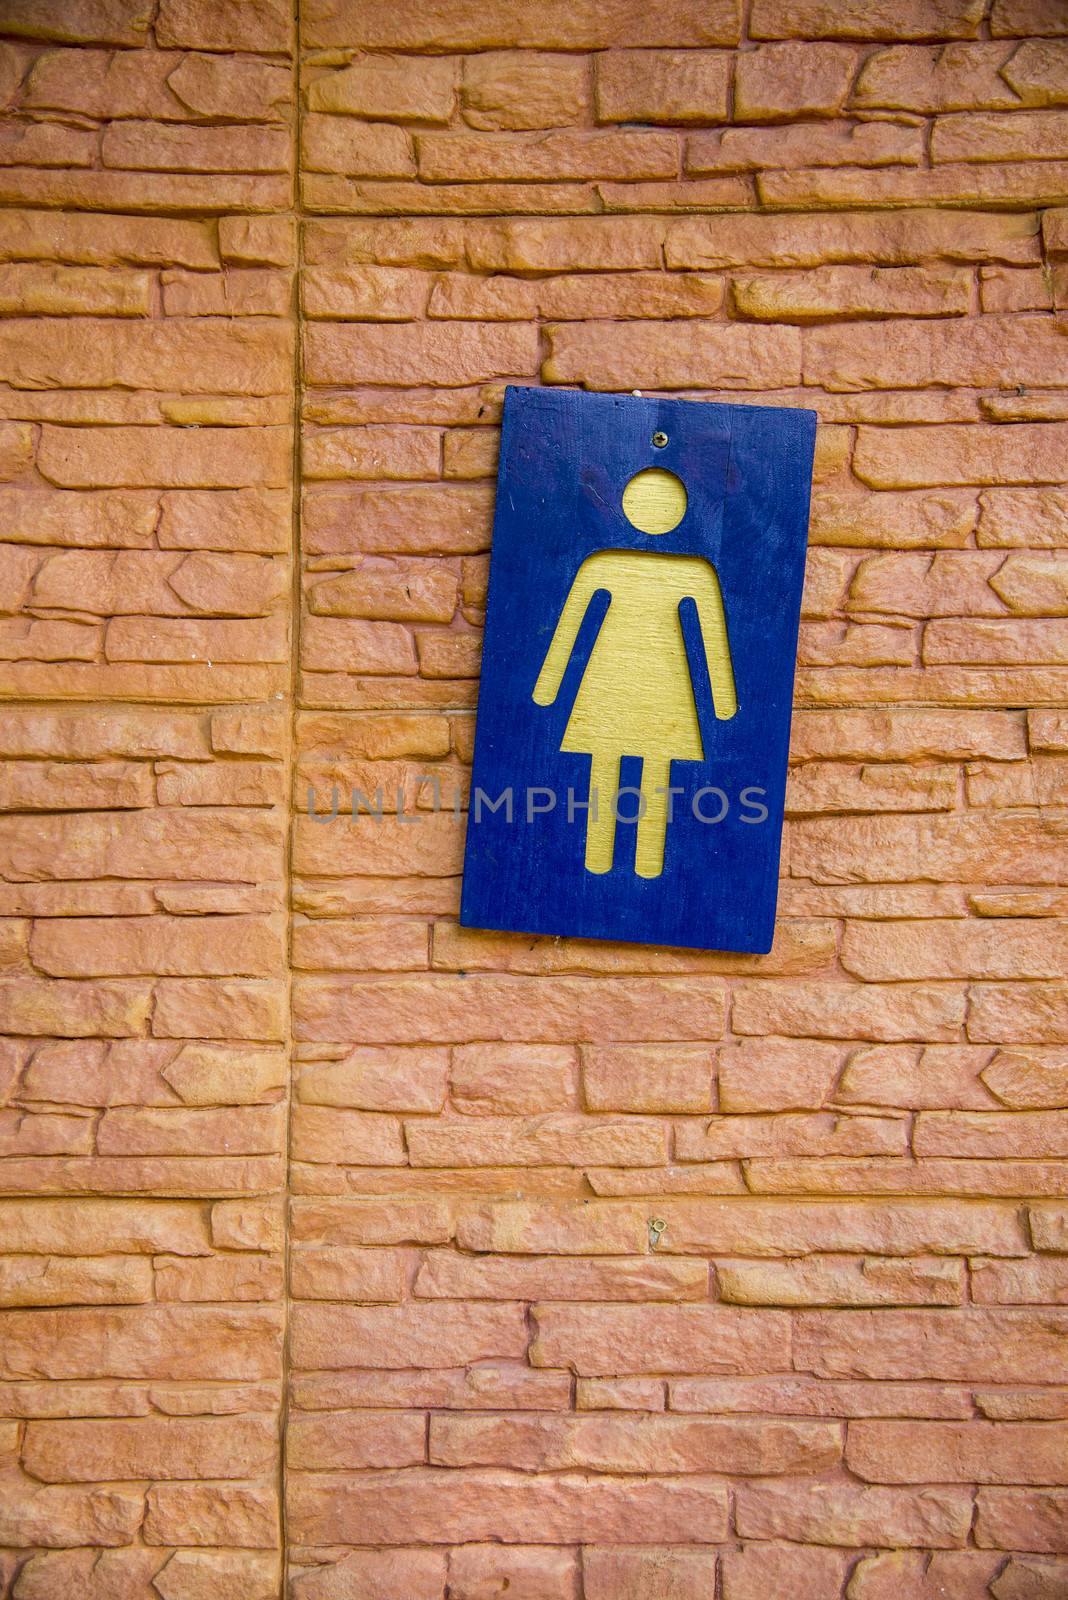 Lady toilet sign on the wall2